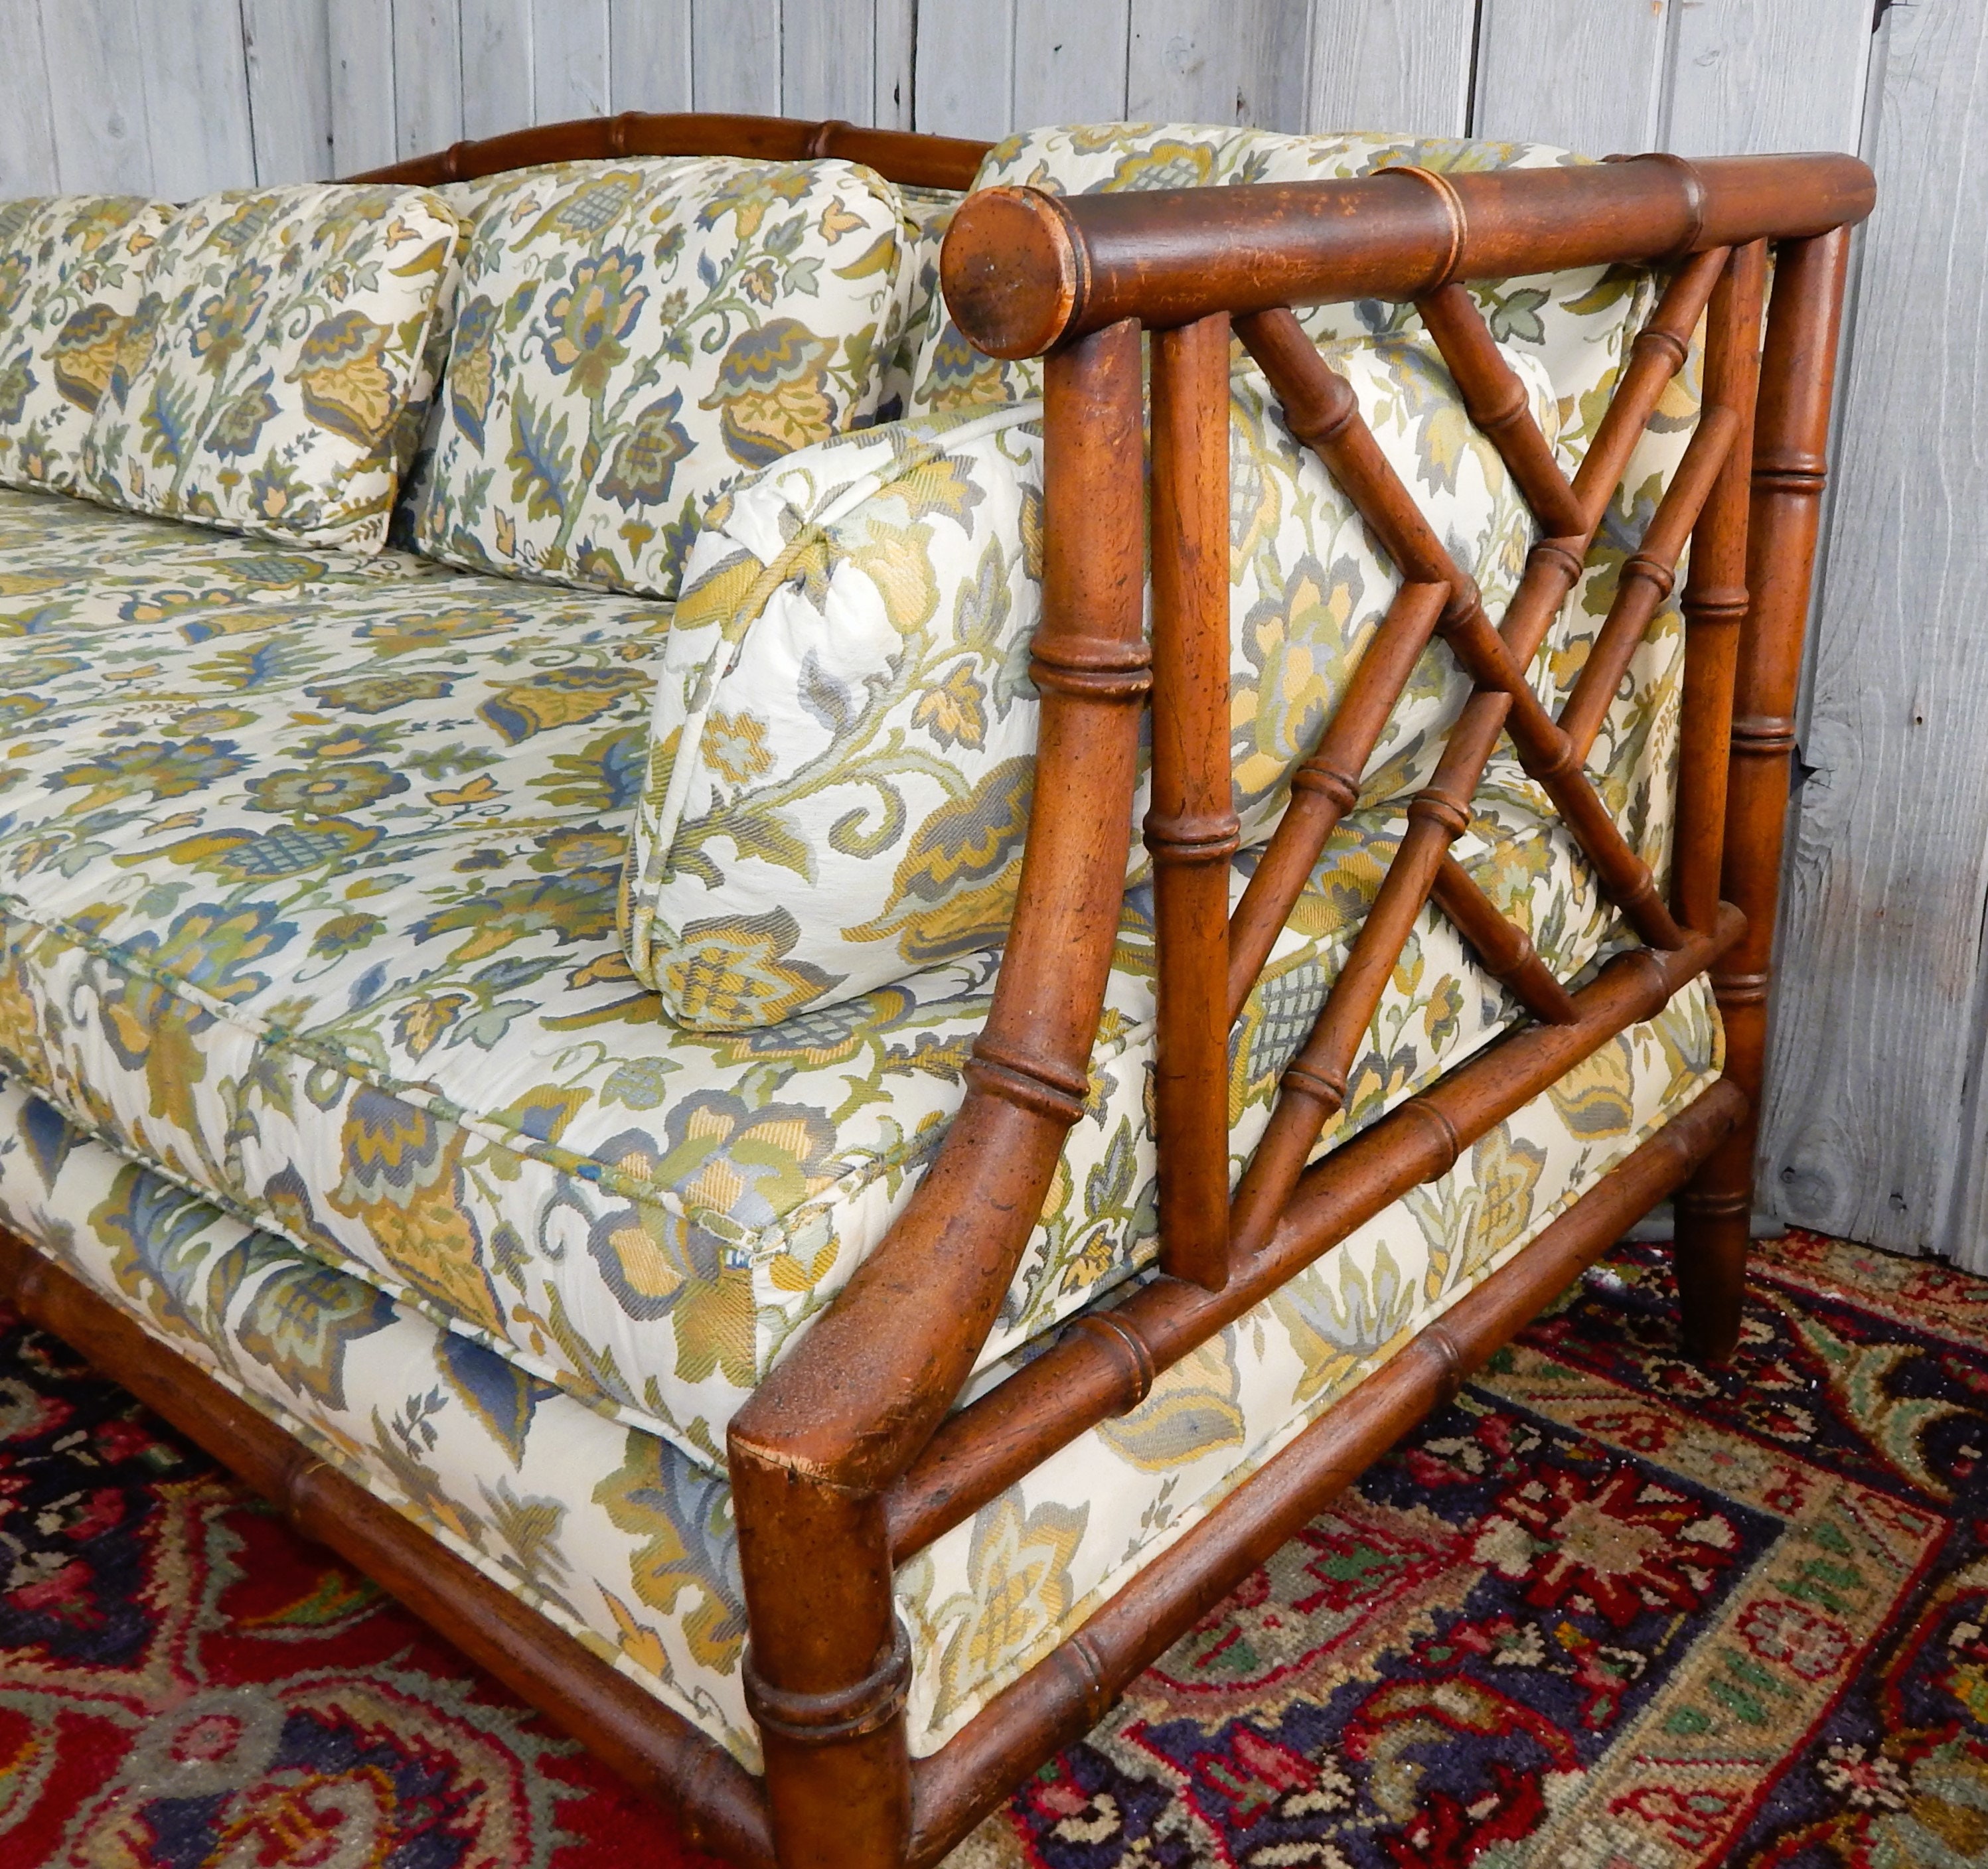 Vintage Rattan Couch Etsy 